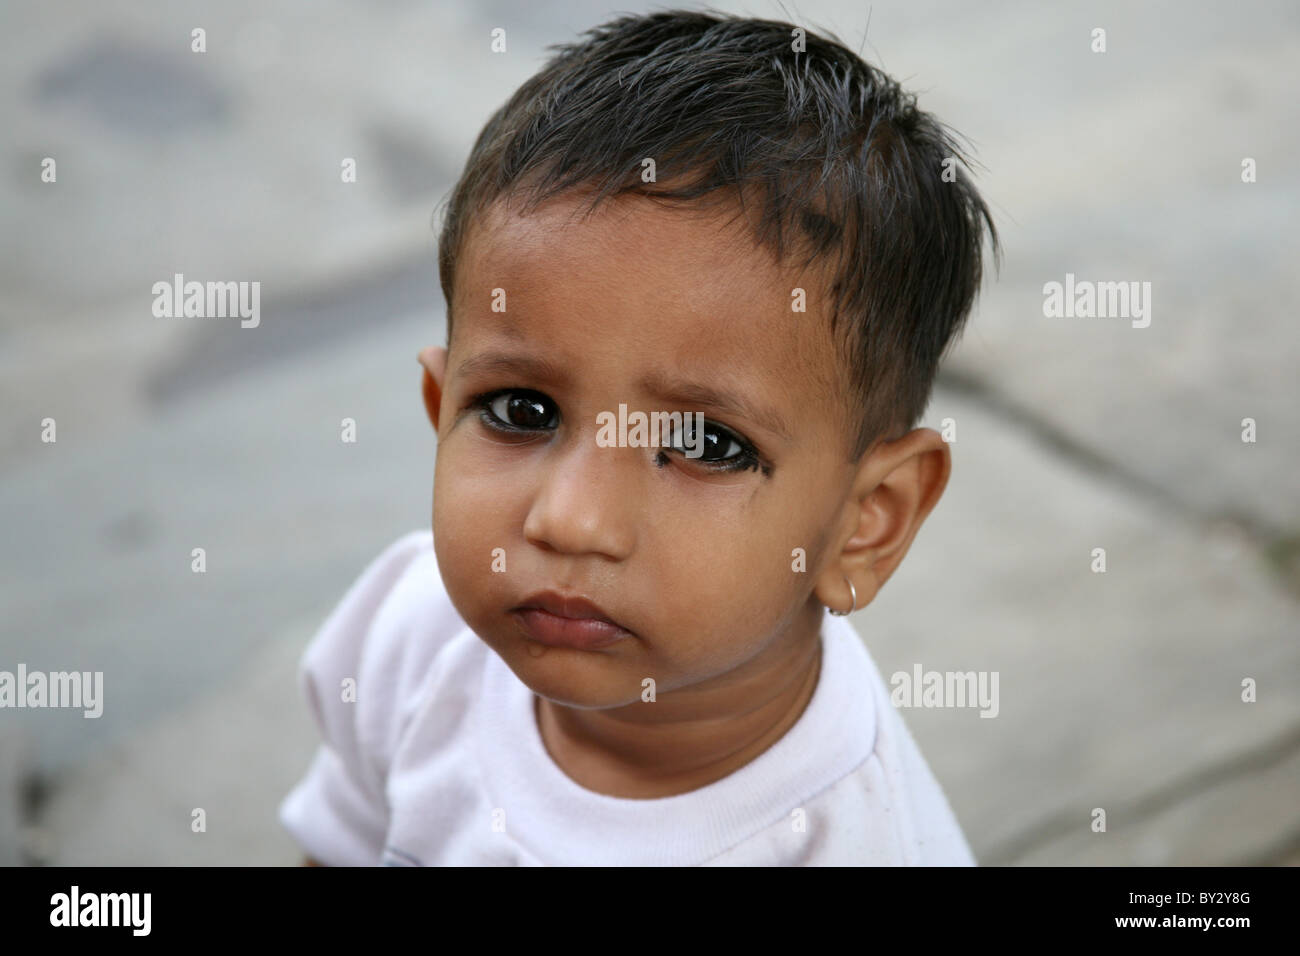 Portrait of an Indian child with kohl around their eyes Stock Photo